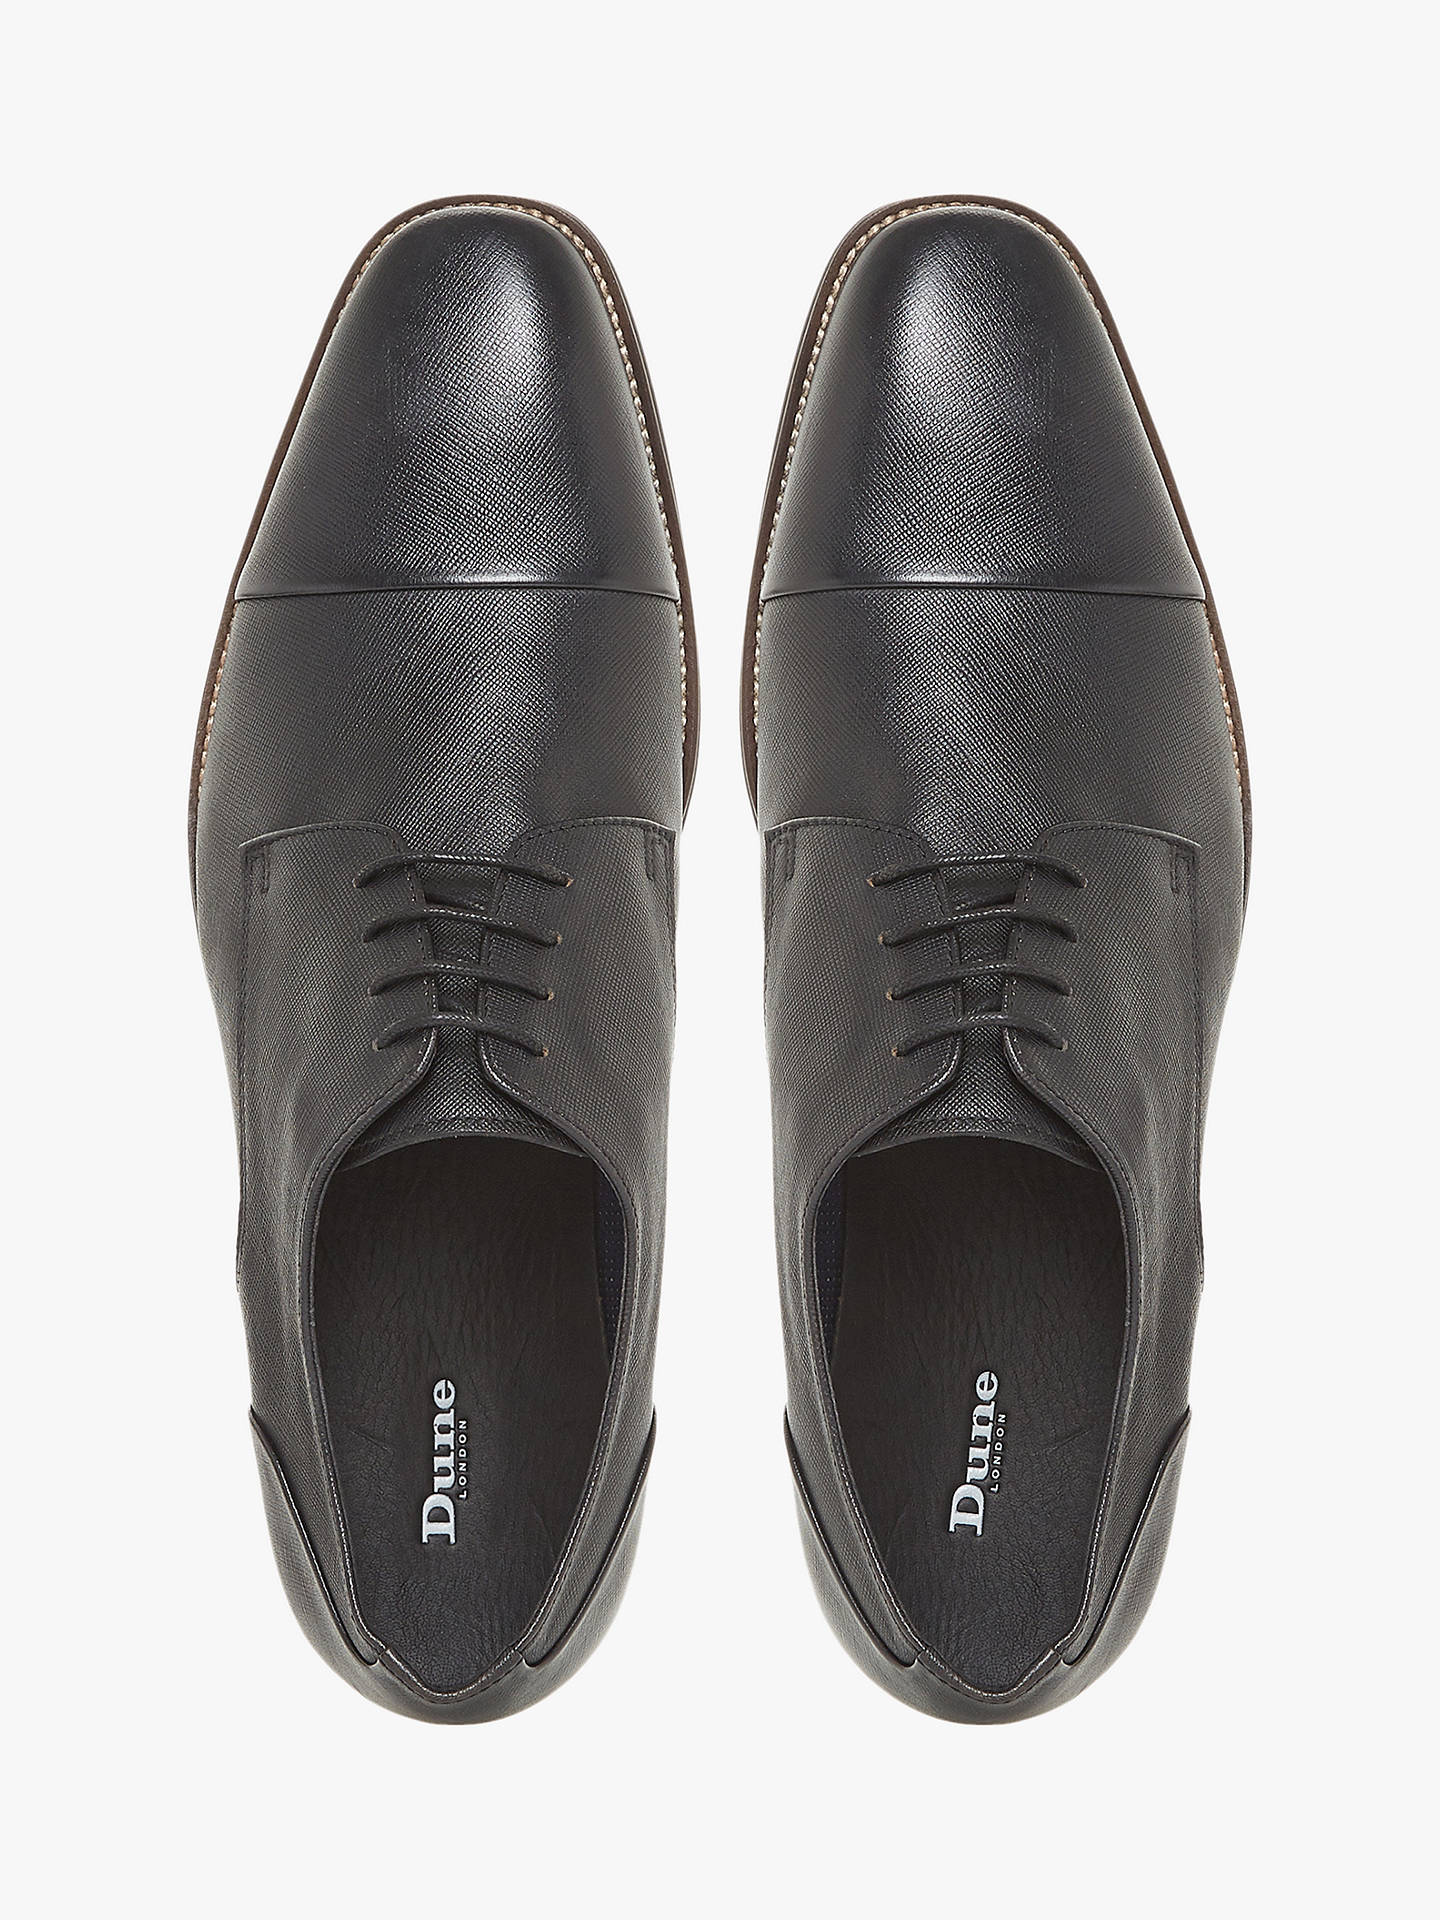 Dune Scan Leather Saffiano Lace Up Formal Shoes, Black at John Lewis ...